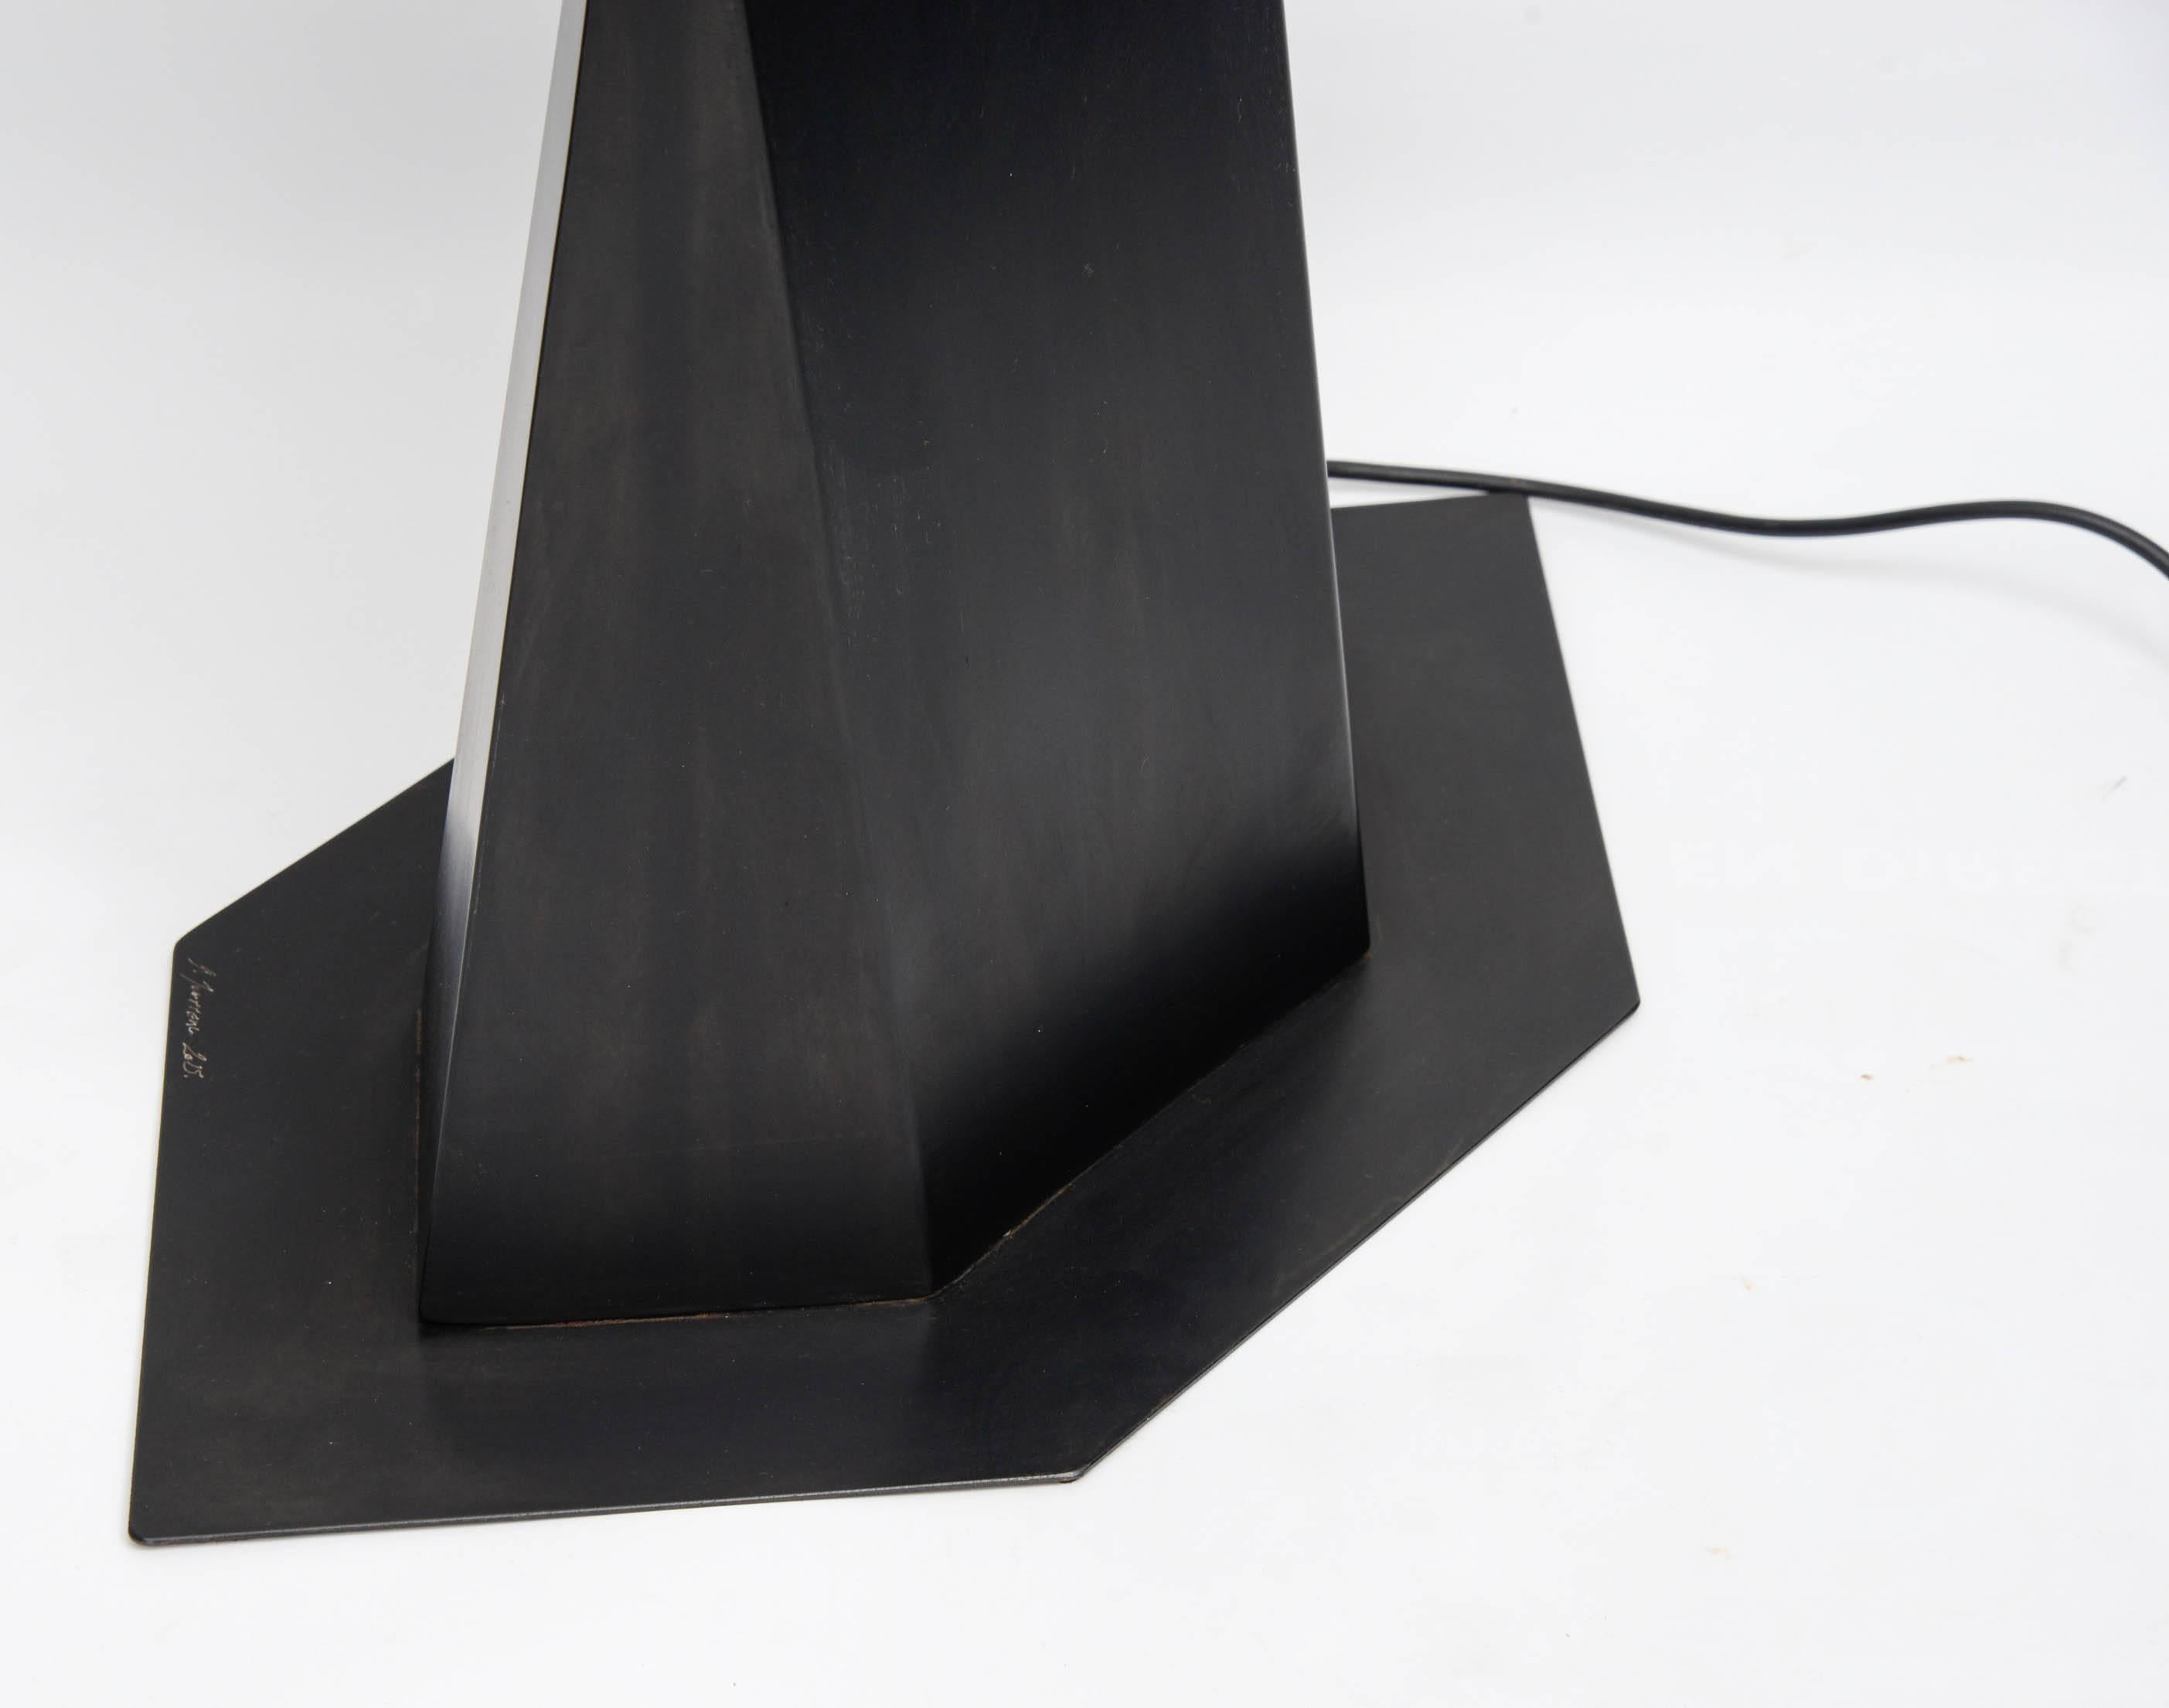 Floor Lamp TOTEM by Stephane Ducatteau for Fortuna In Excellent Condition For Sale In Saint-Ouen, FR